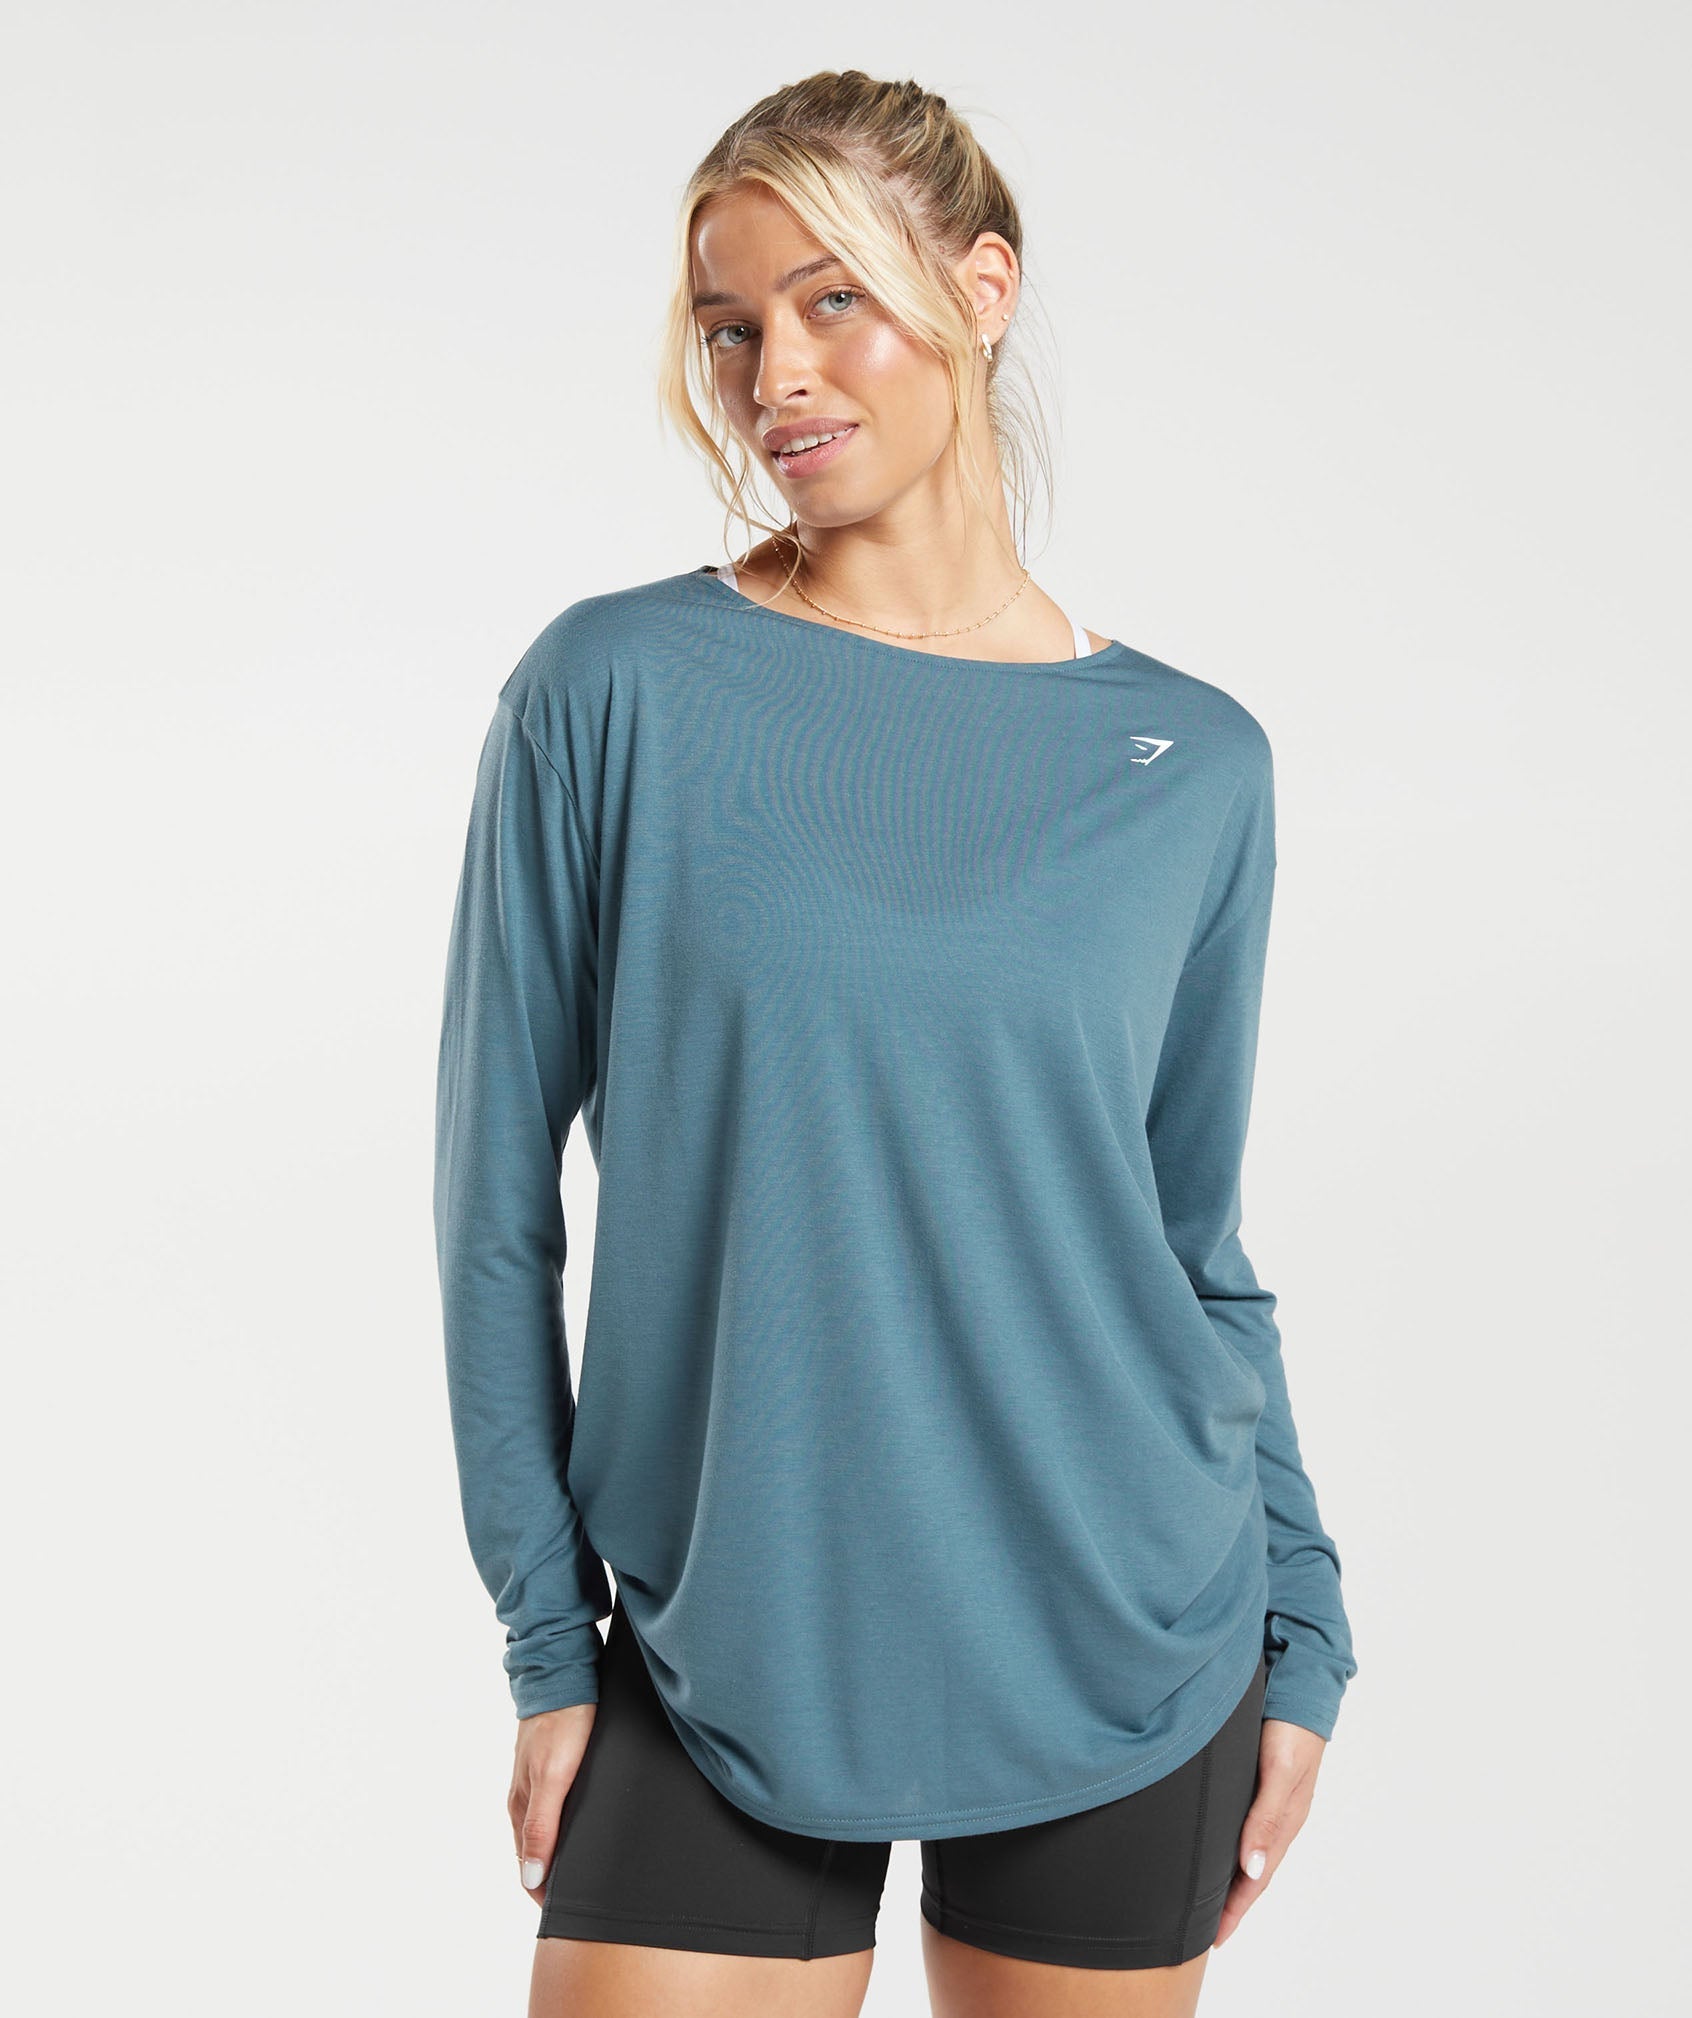 Super Soft Cut-Out Long Sleeve Top in Denim Teal